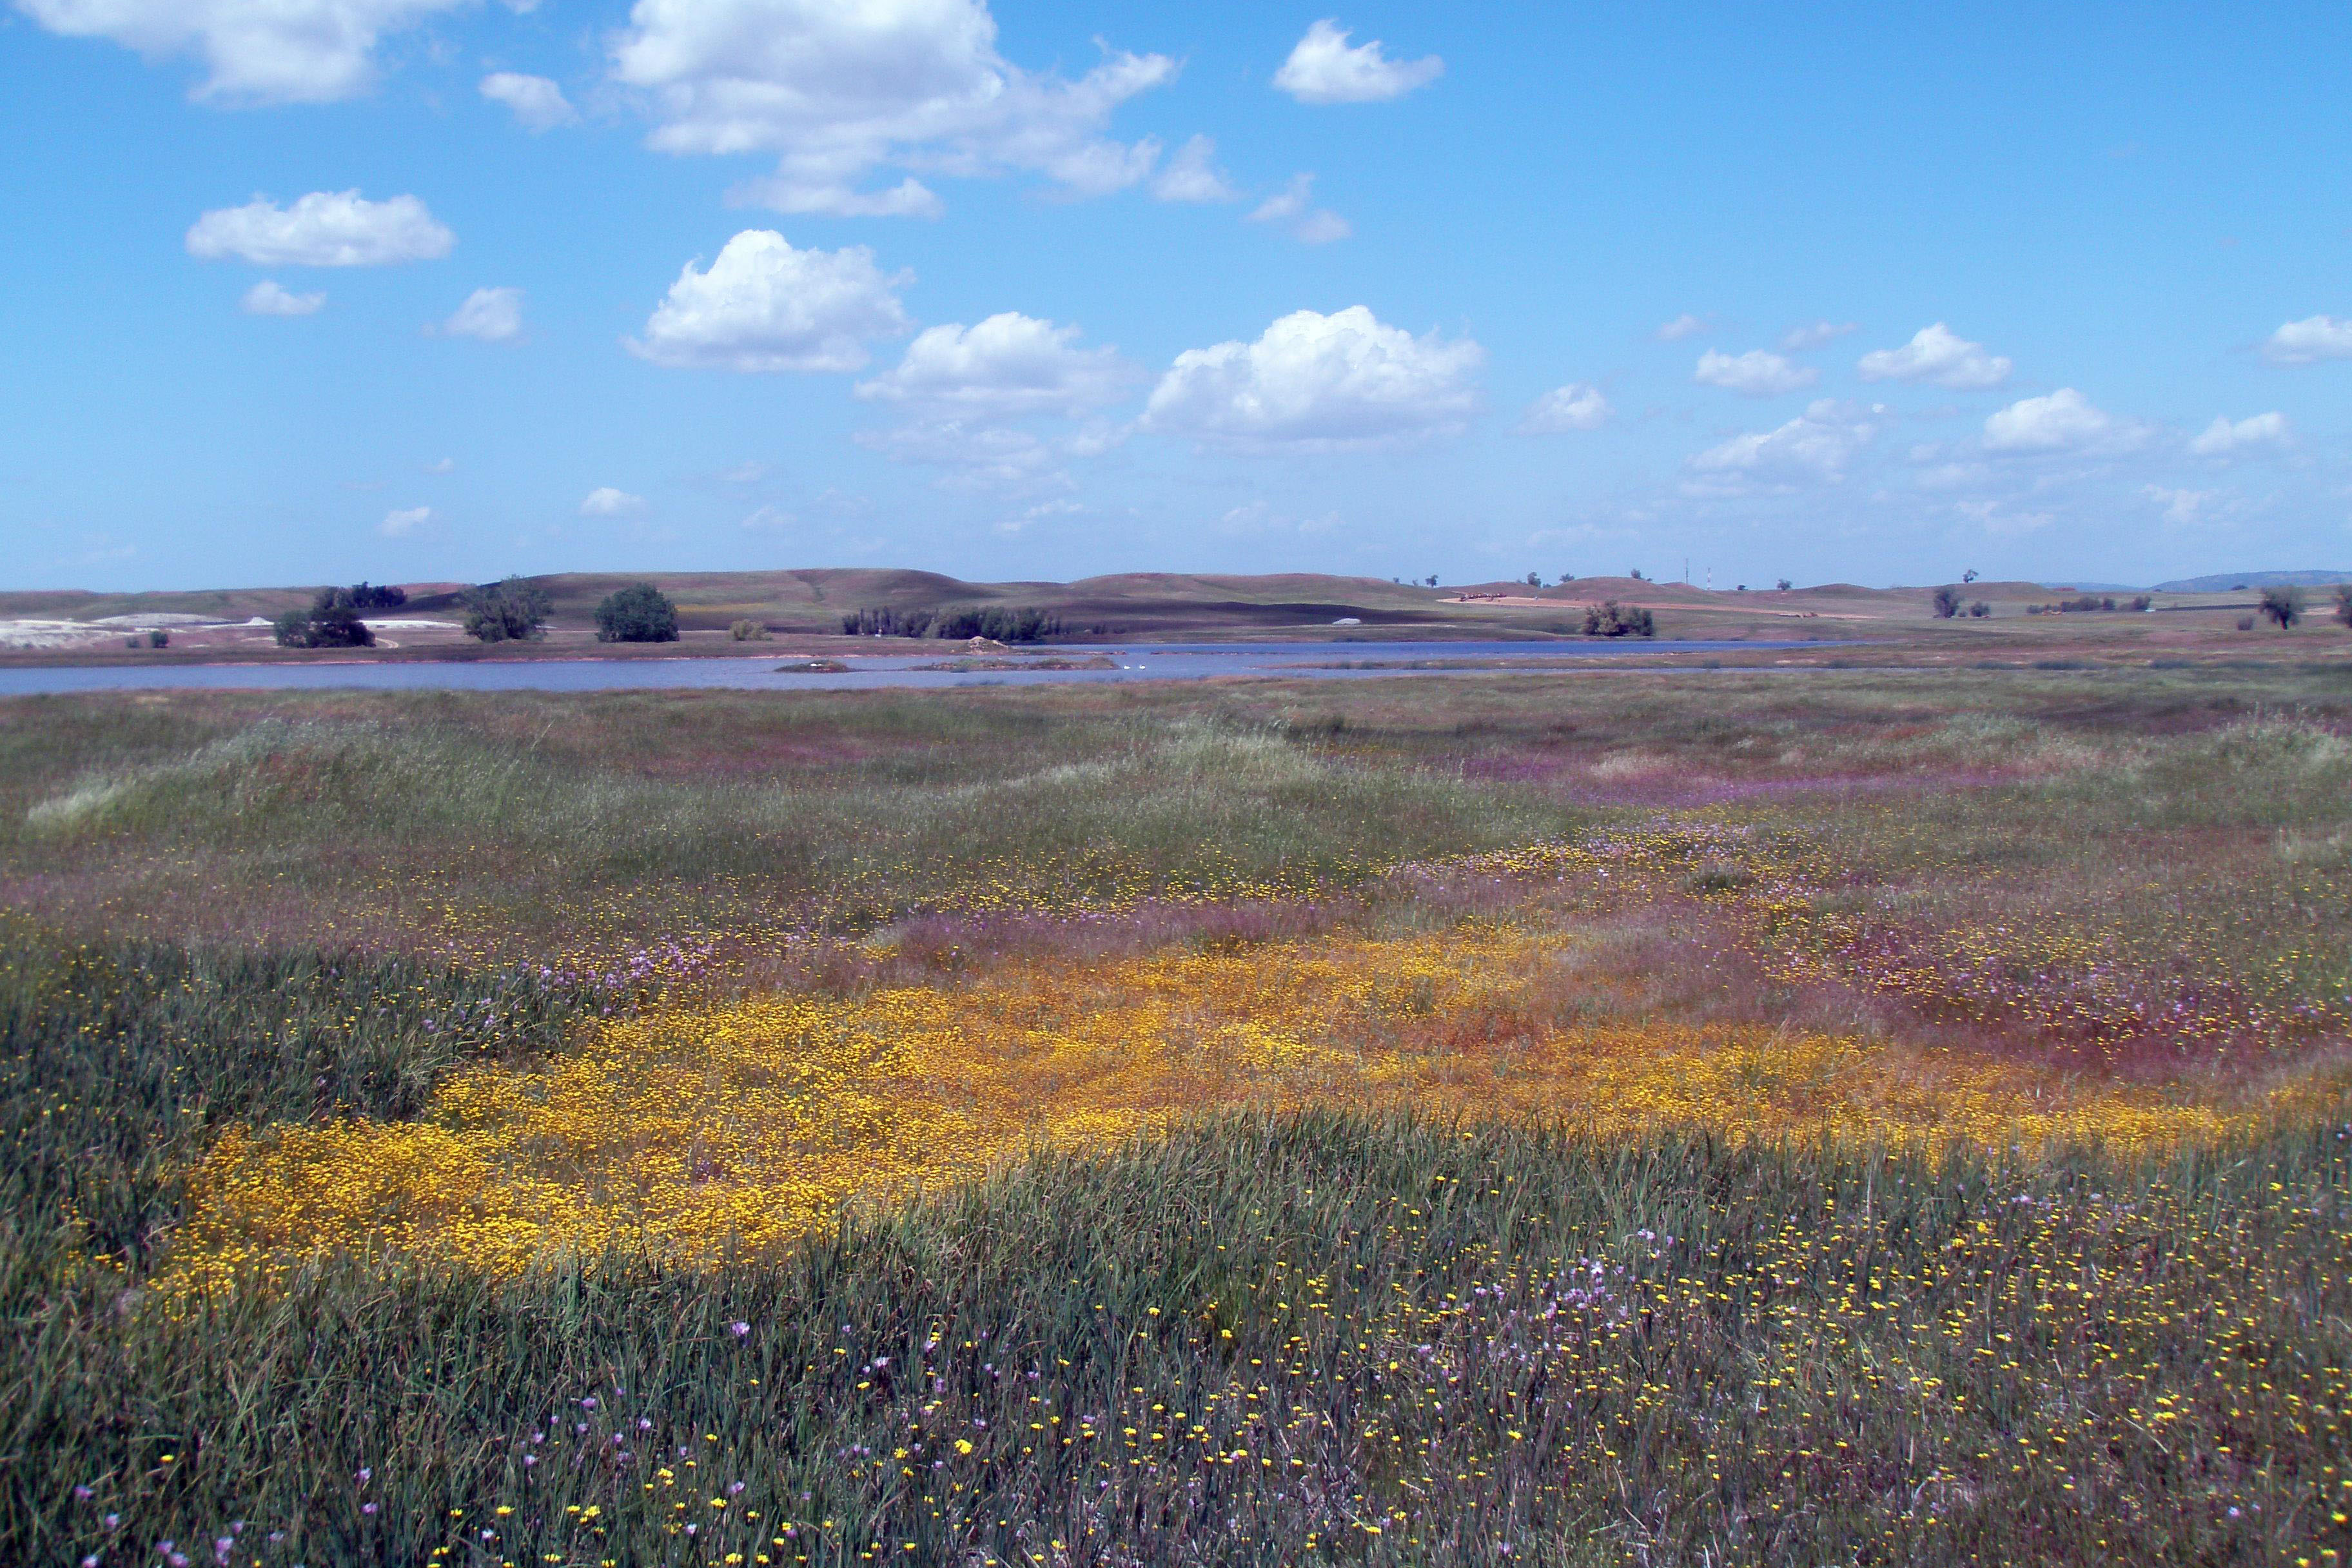 Short multicolored flowers cover a large field